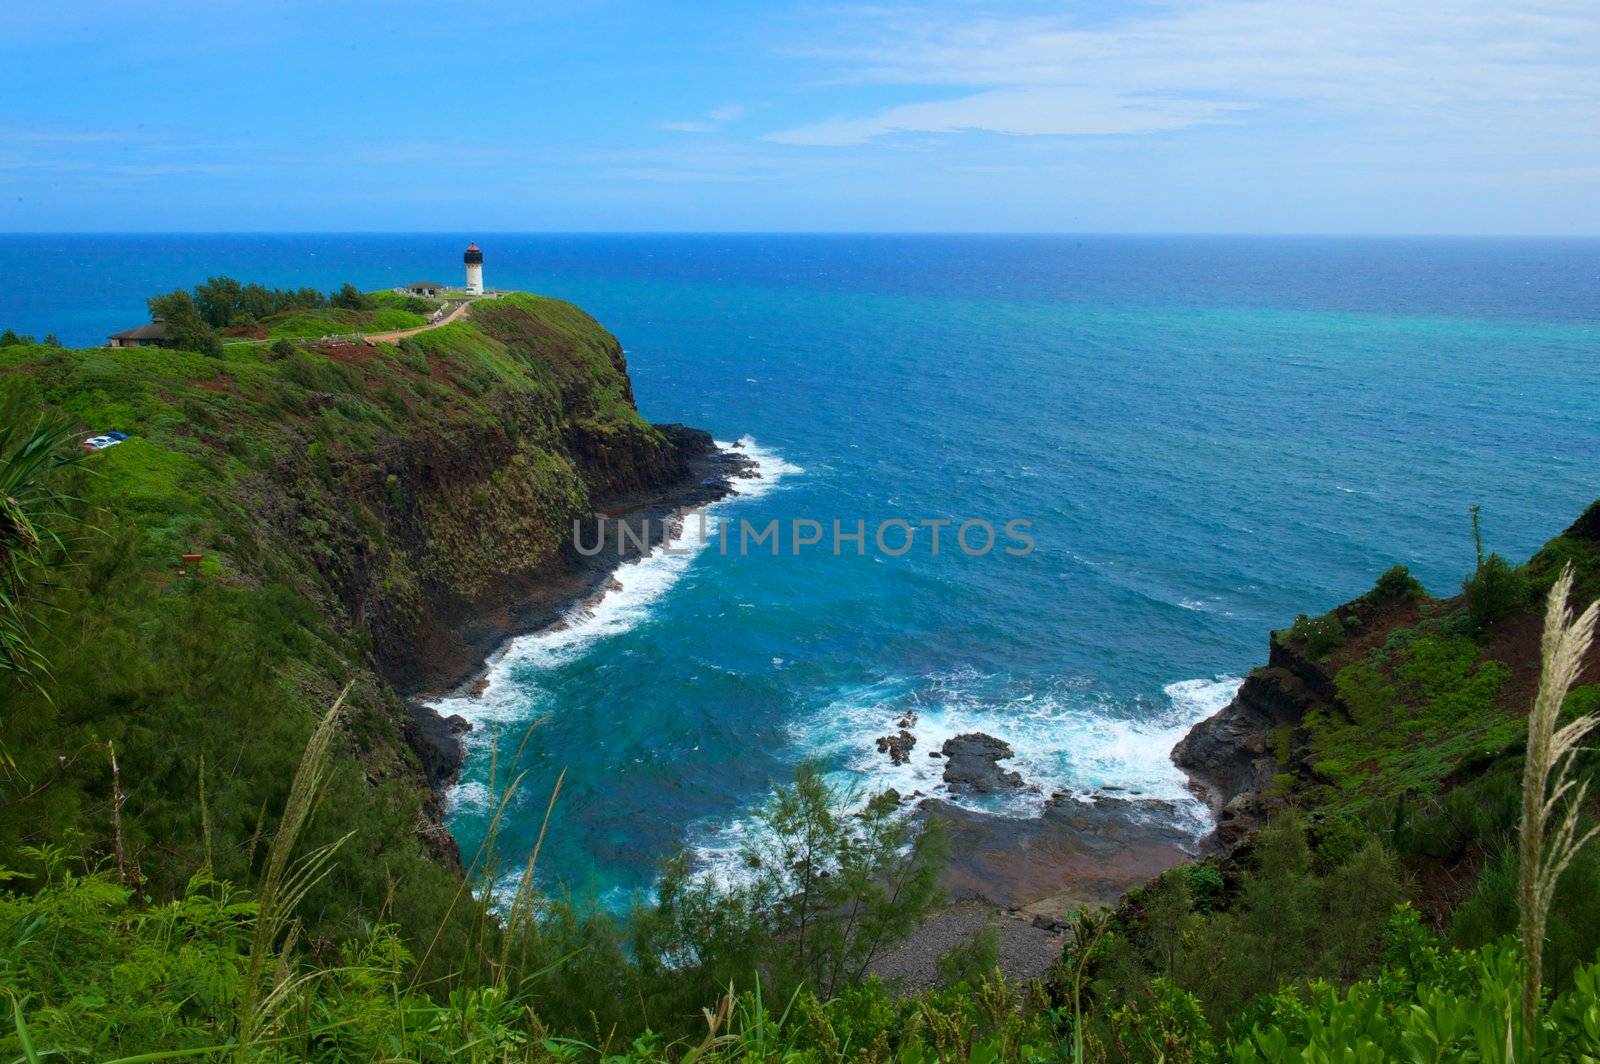 Lighthouse on the Island of Kauai by pixelsnap